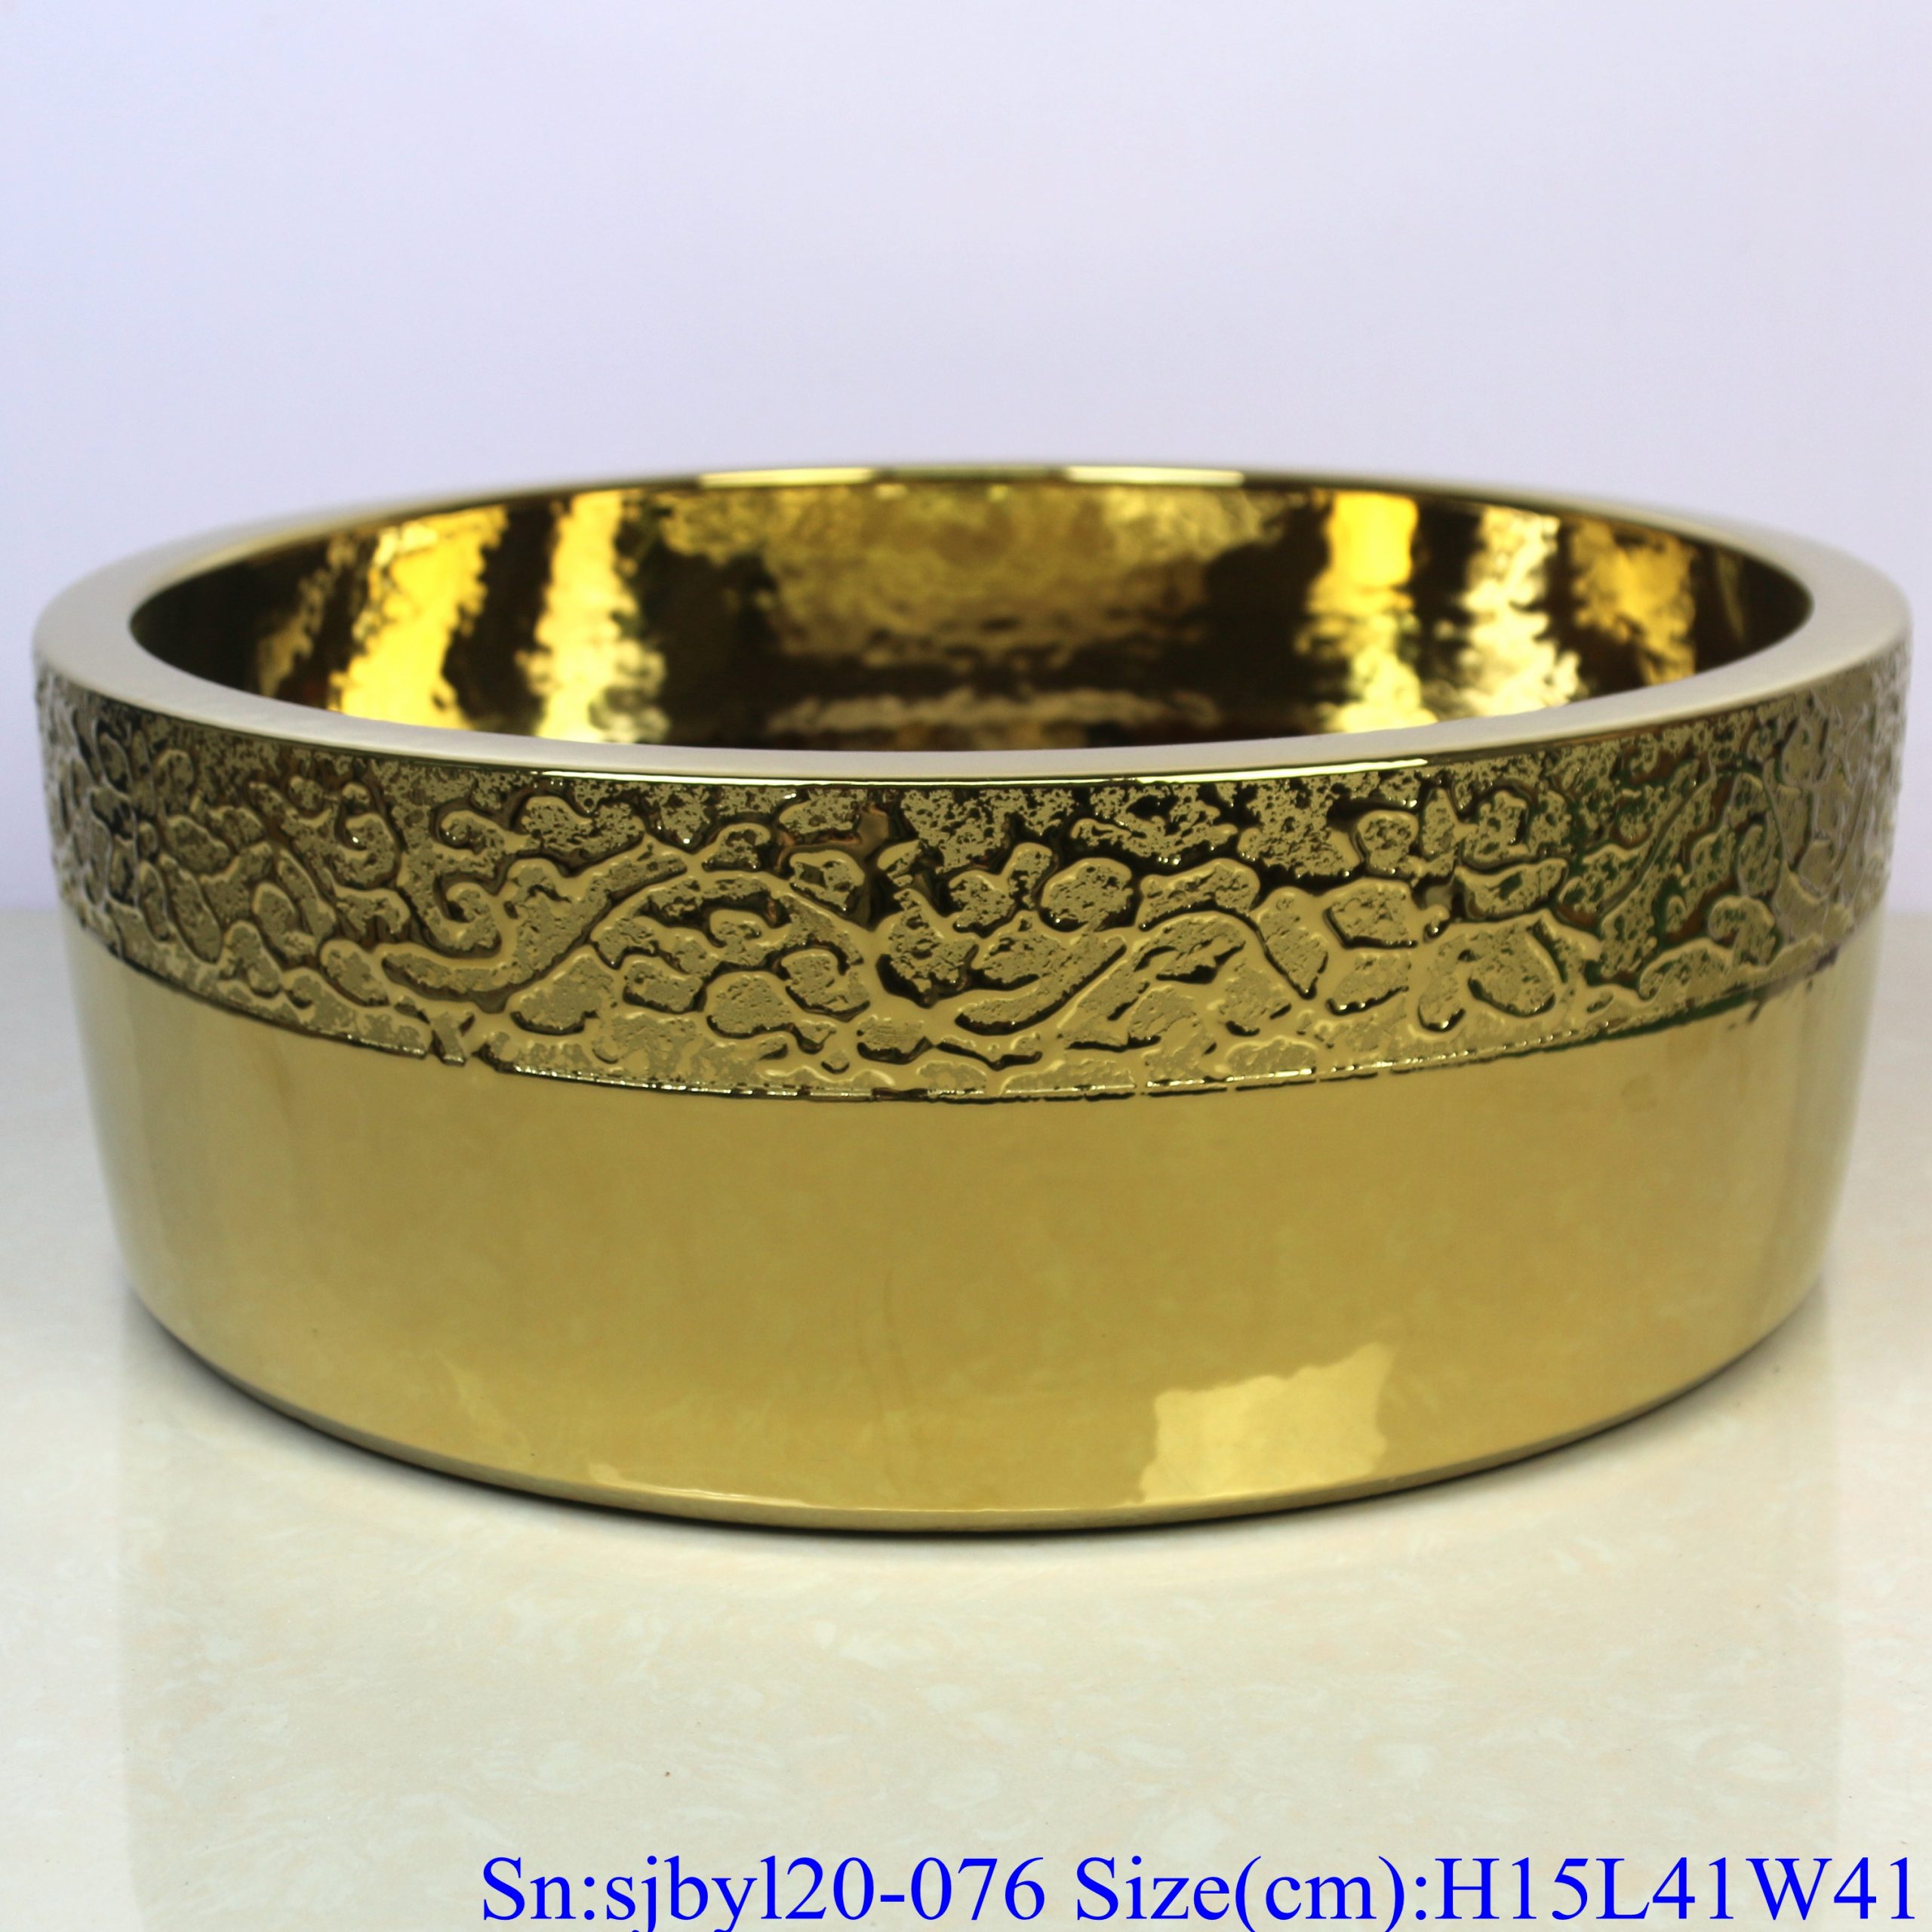 sjbyl120-076 China style - Table basin - Metallic glaze and electroplating series - Straight mouth golden chrysanthemum - Cast gold